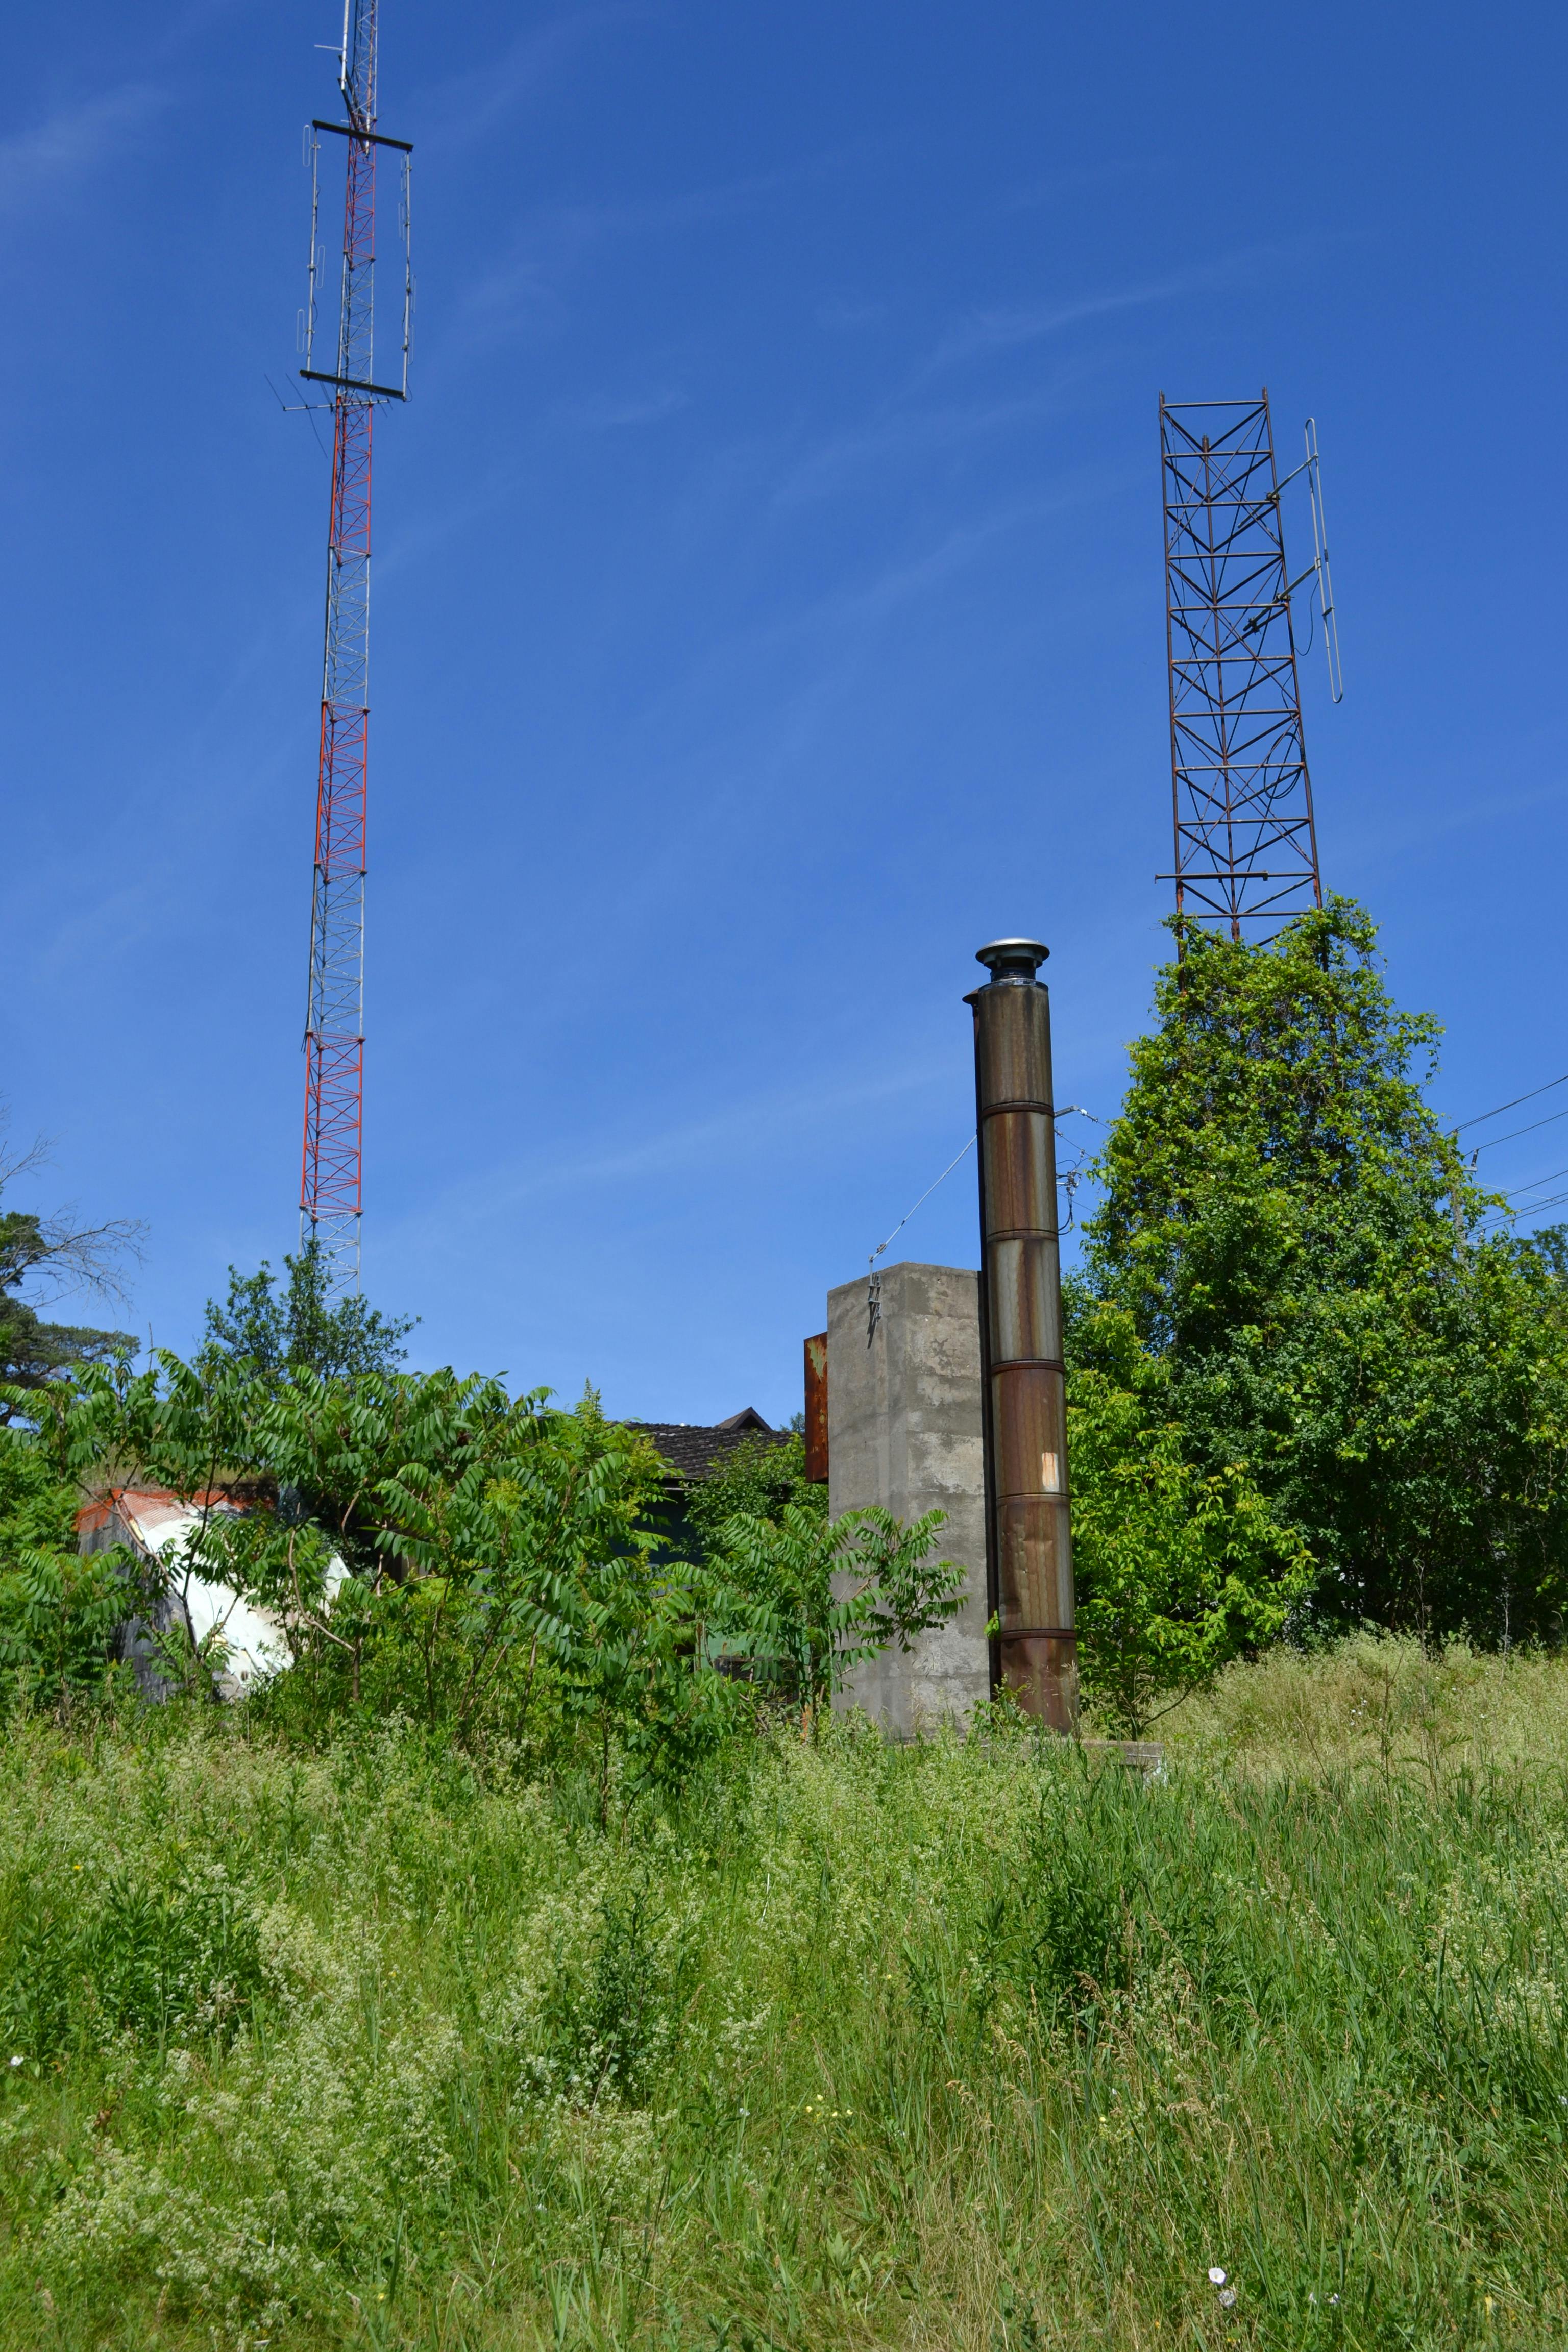 Above ground communications equipment and infrastructure